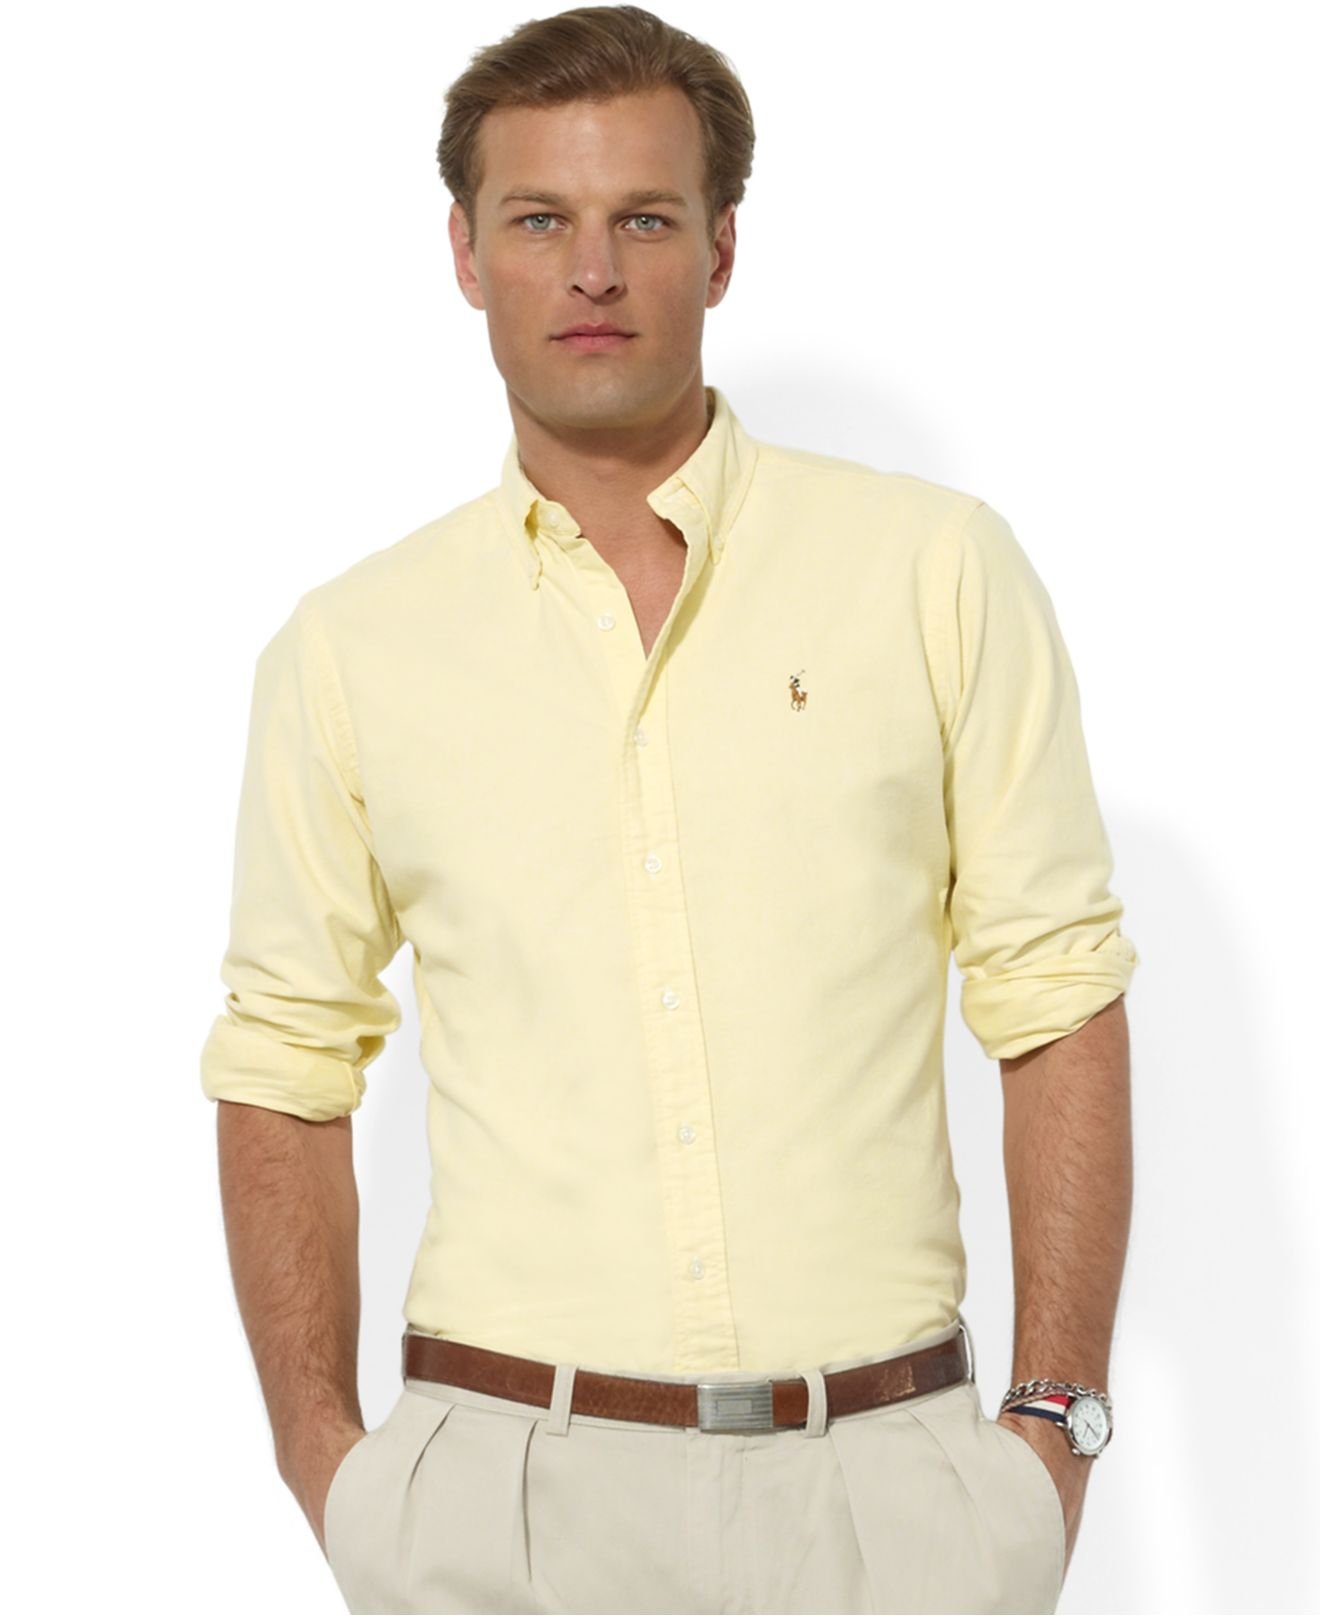 polo-ralph-lauren-yellow-core-classic-fit-oxford-shirt-product-1-3446339-0-373240630-normal.jpeg